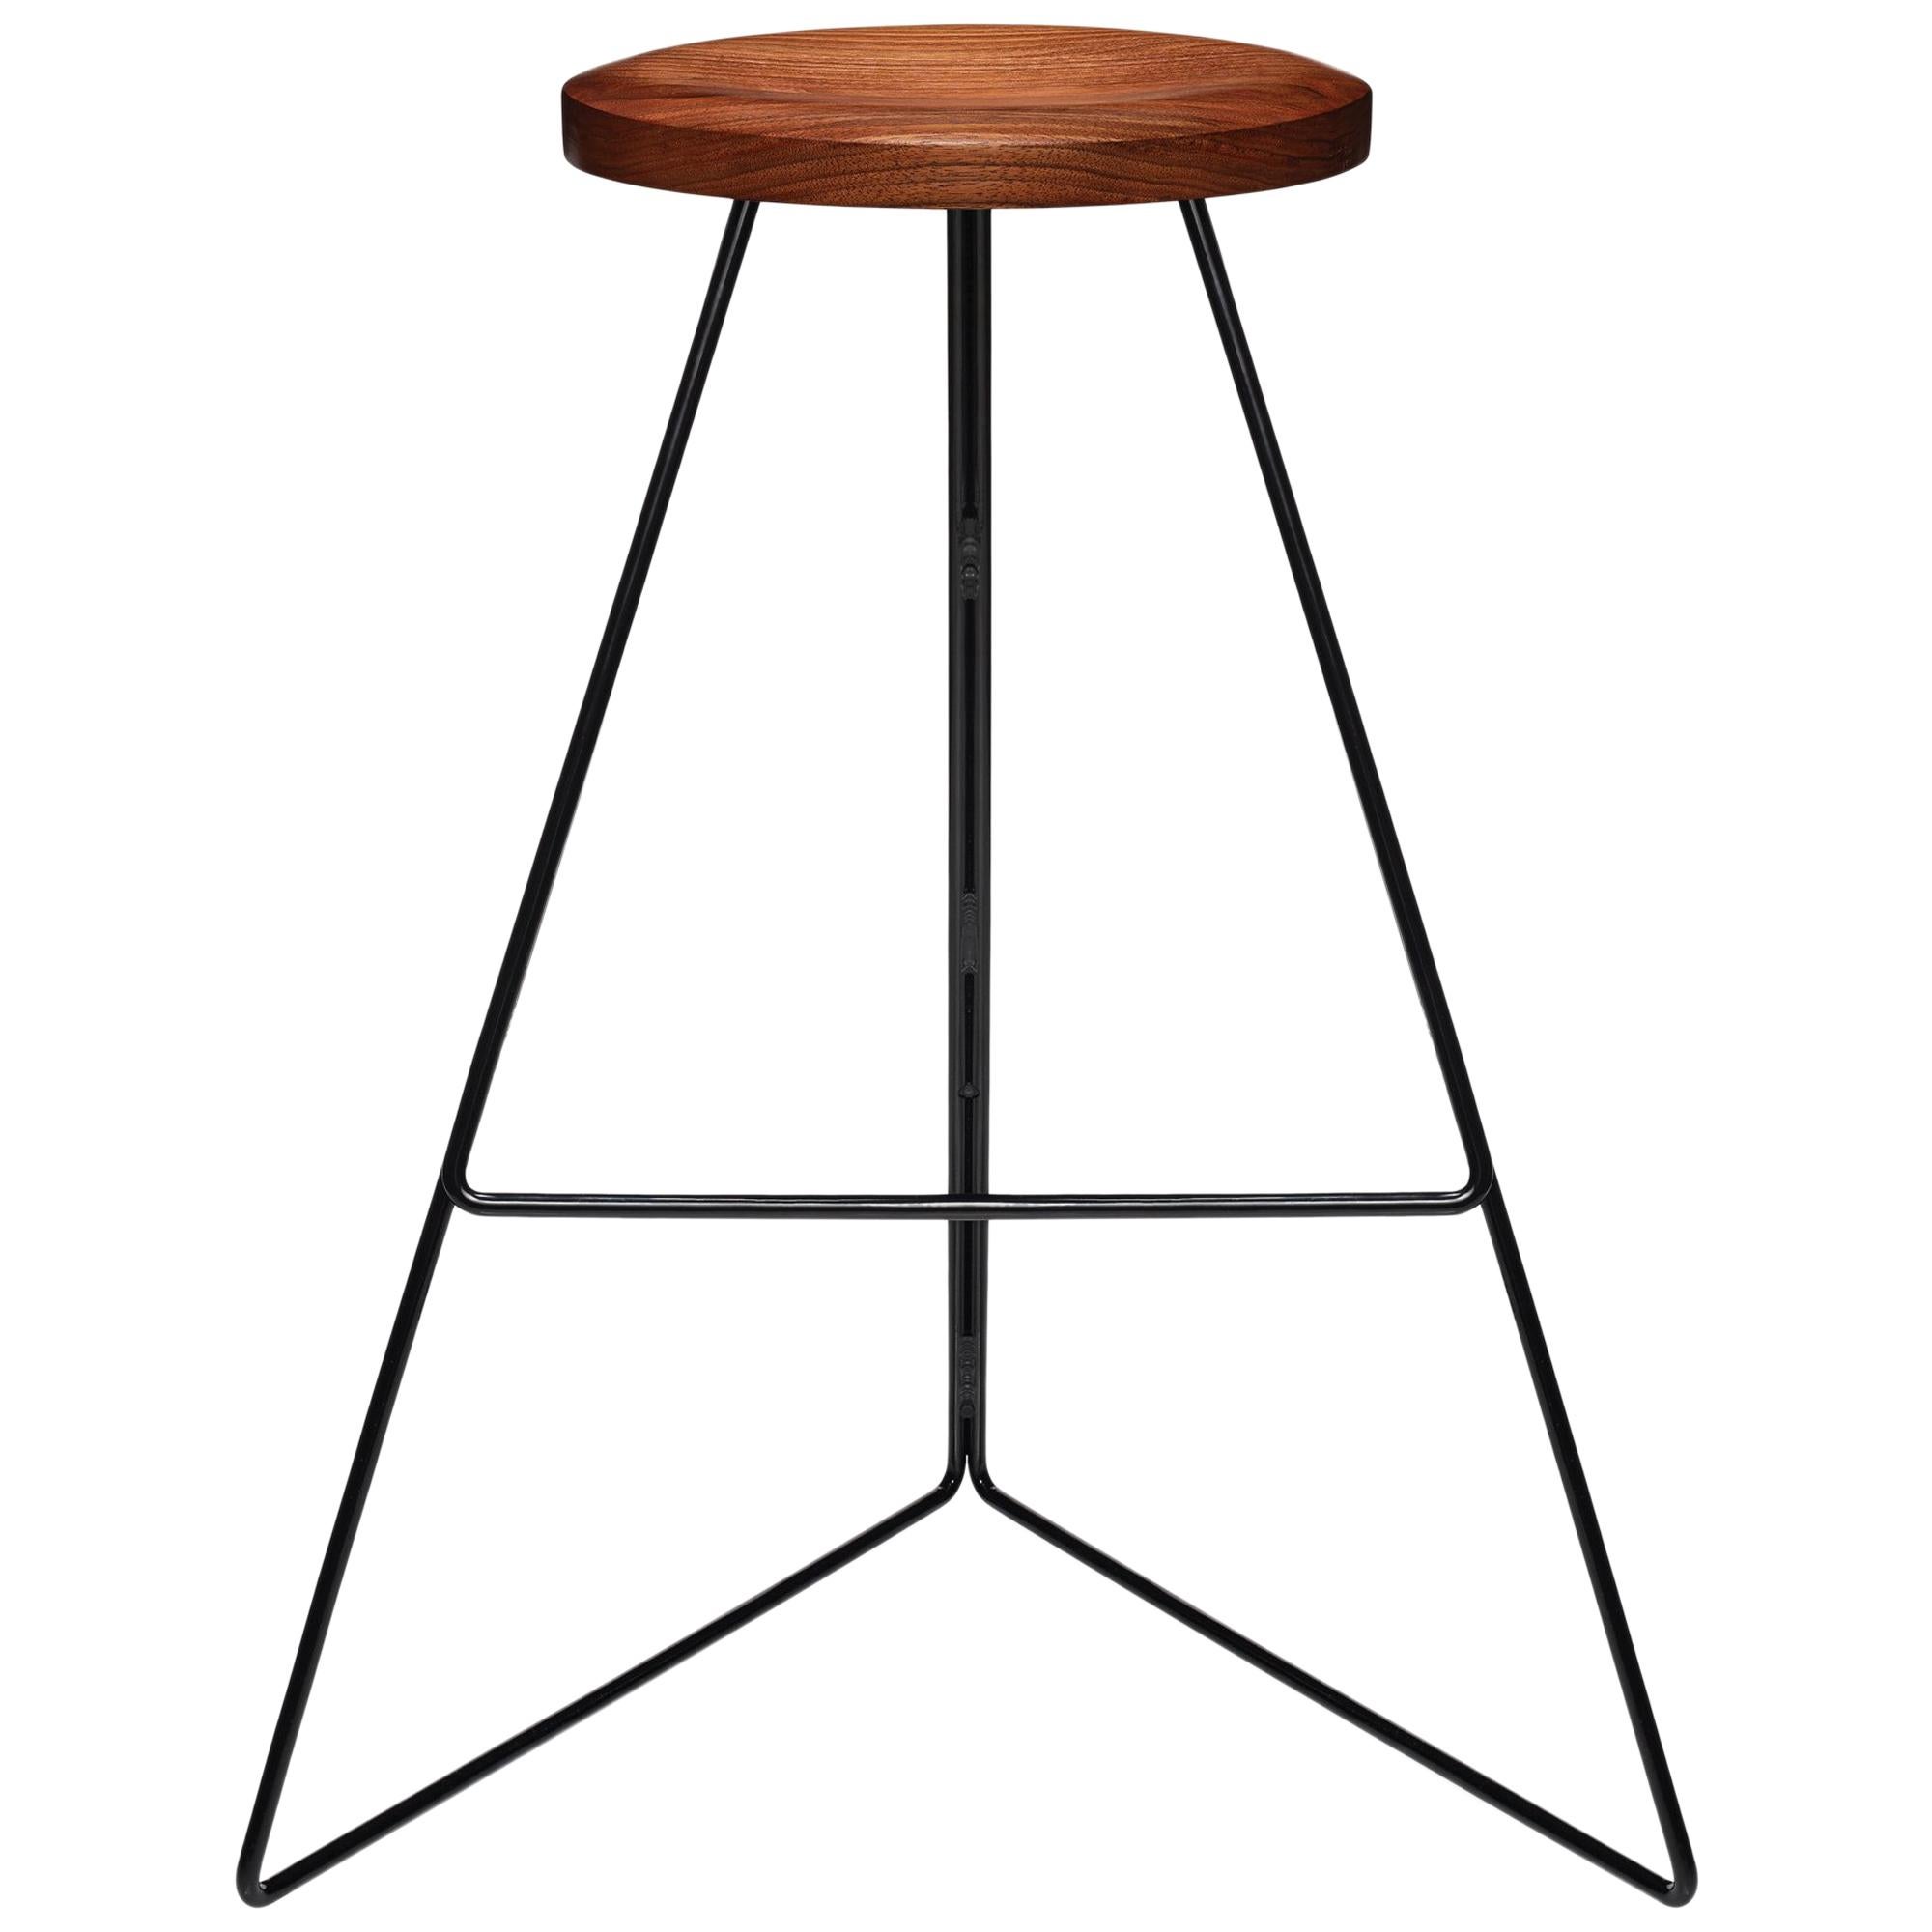 Coleman Stool, Black and Walnut, Counter Height, 54 Variations Available For Sale